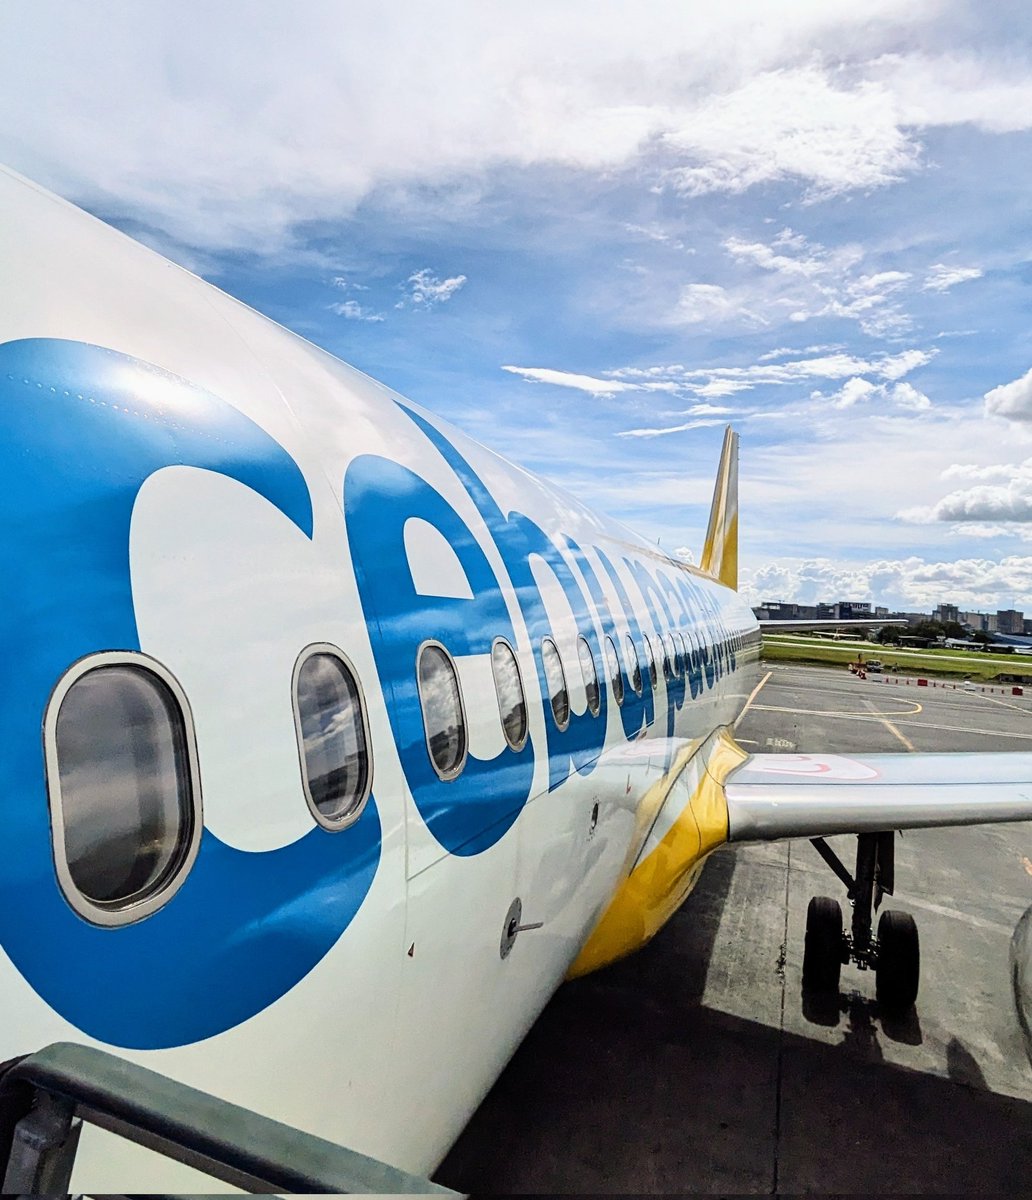 The fun in flight quiz/game got me to #SmileWithCEB 😁
Also thank you for making travel affordable and comfortable in the #Philippines #CEBtravels 🤍